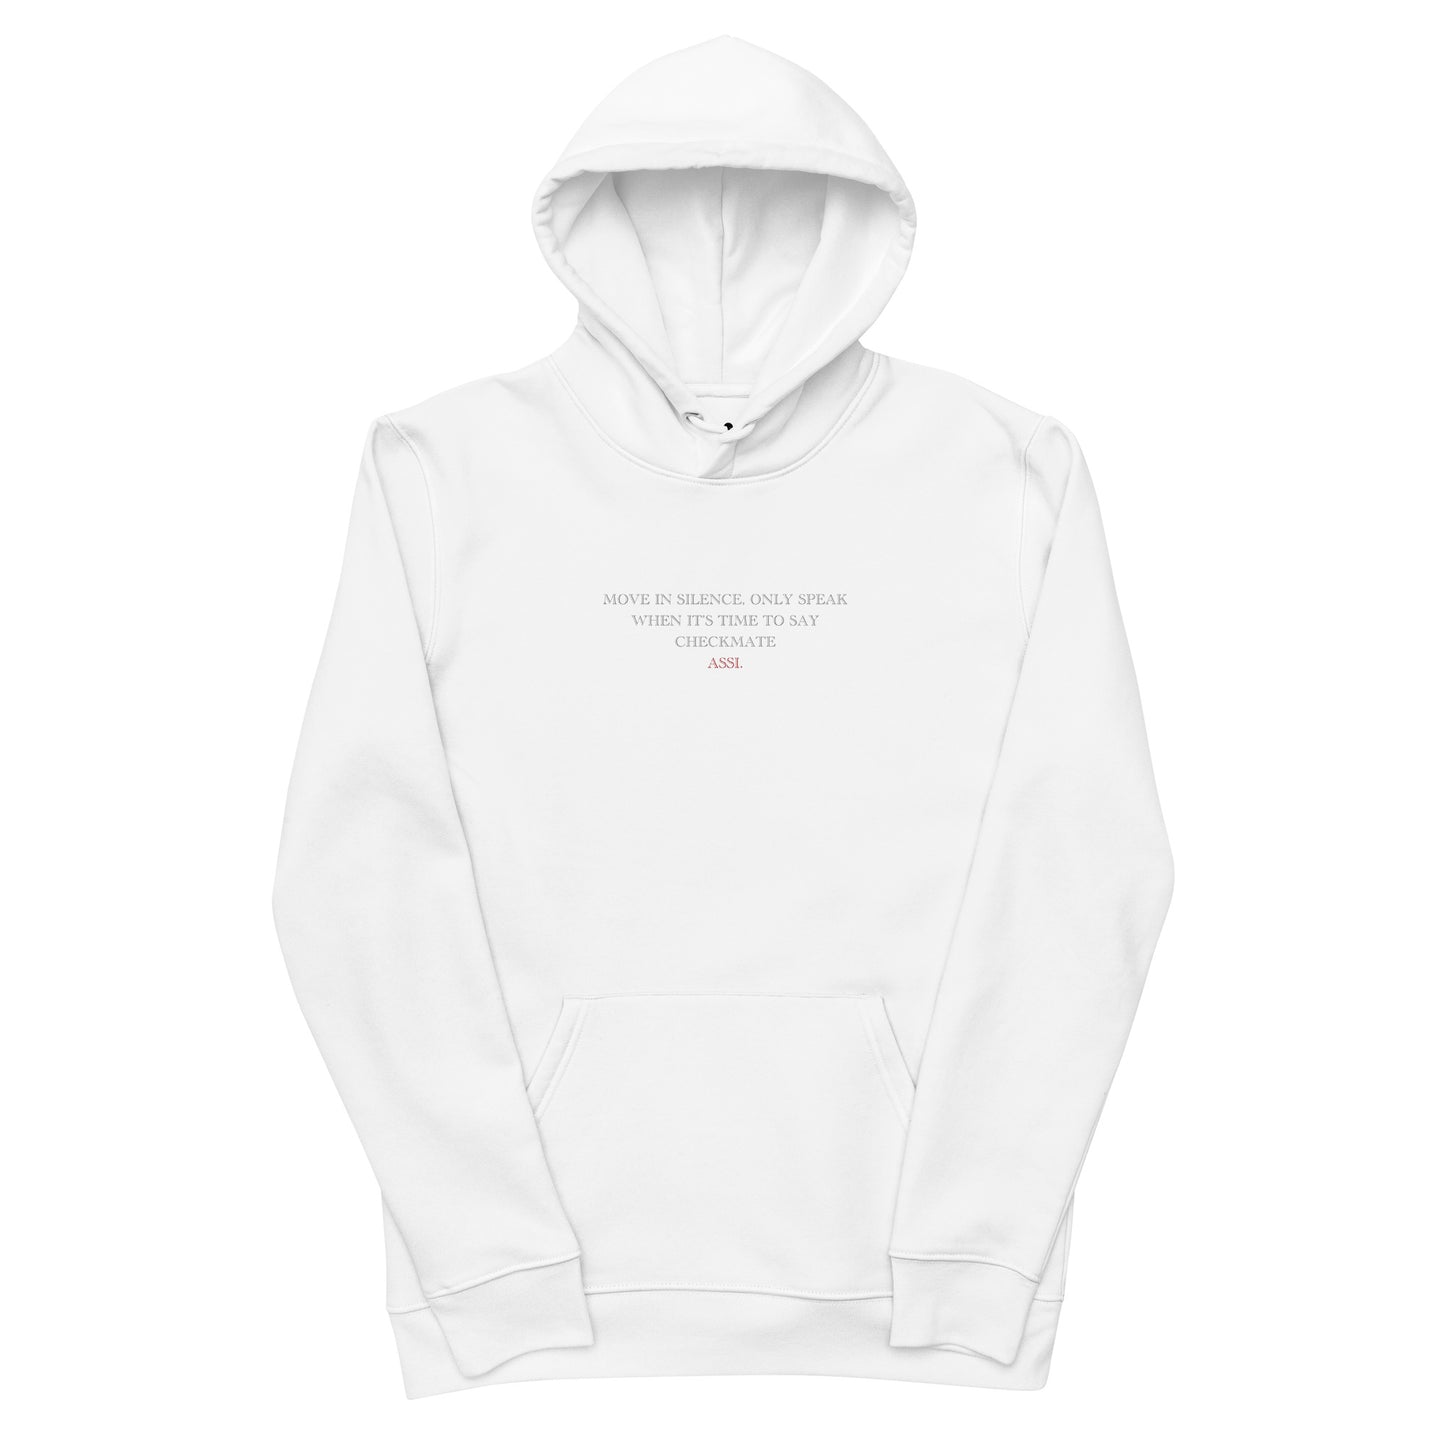 Assi CHECKMATE unisex hoodie